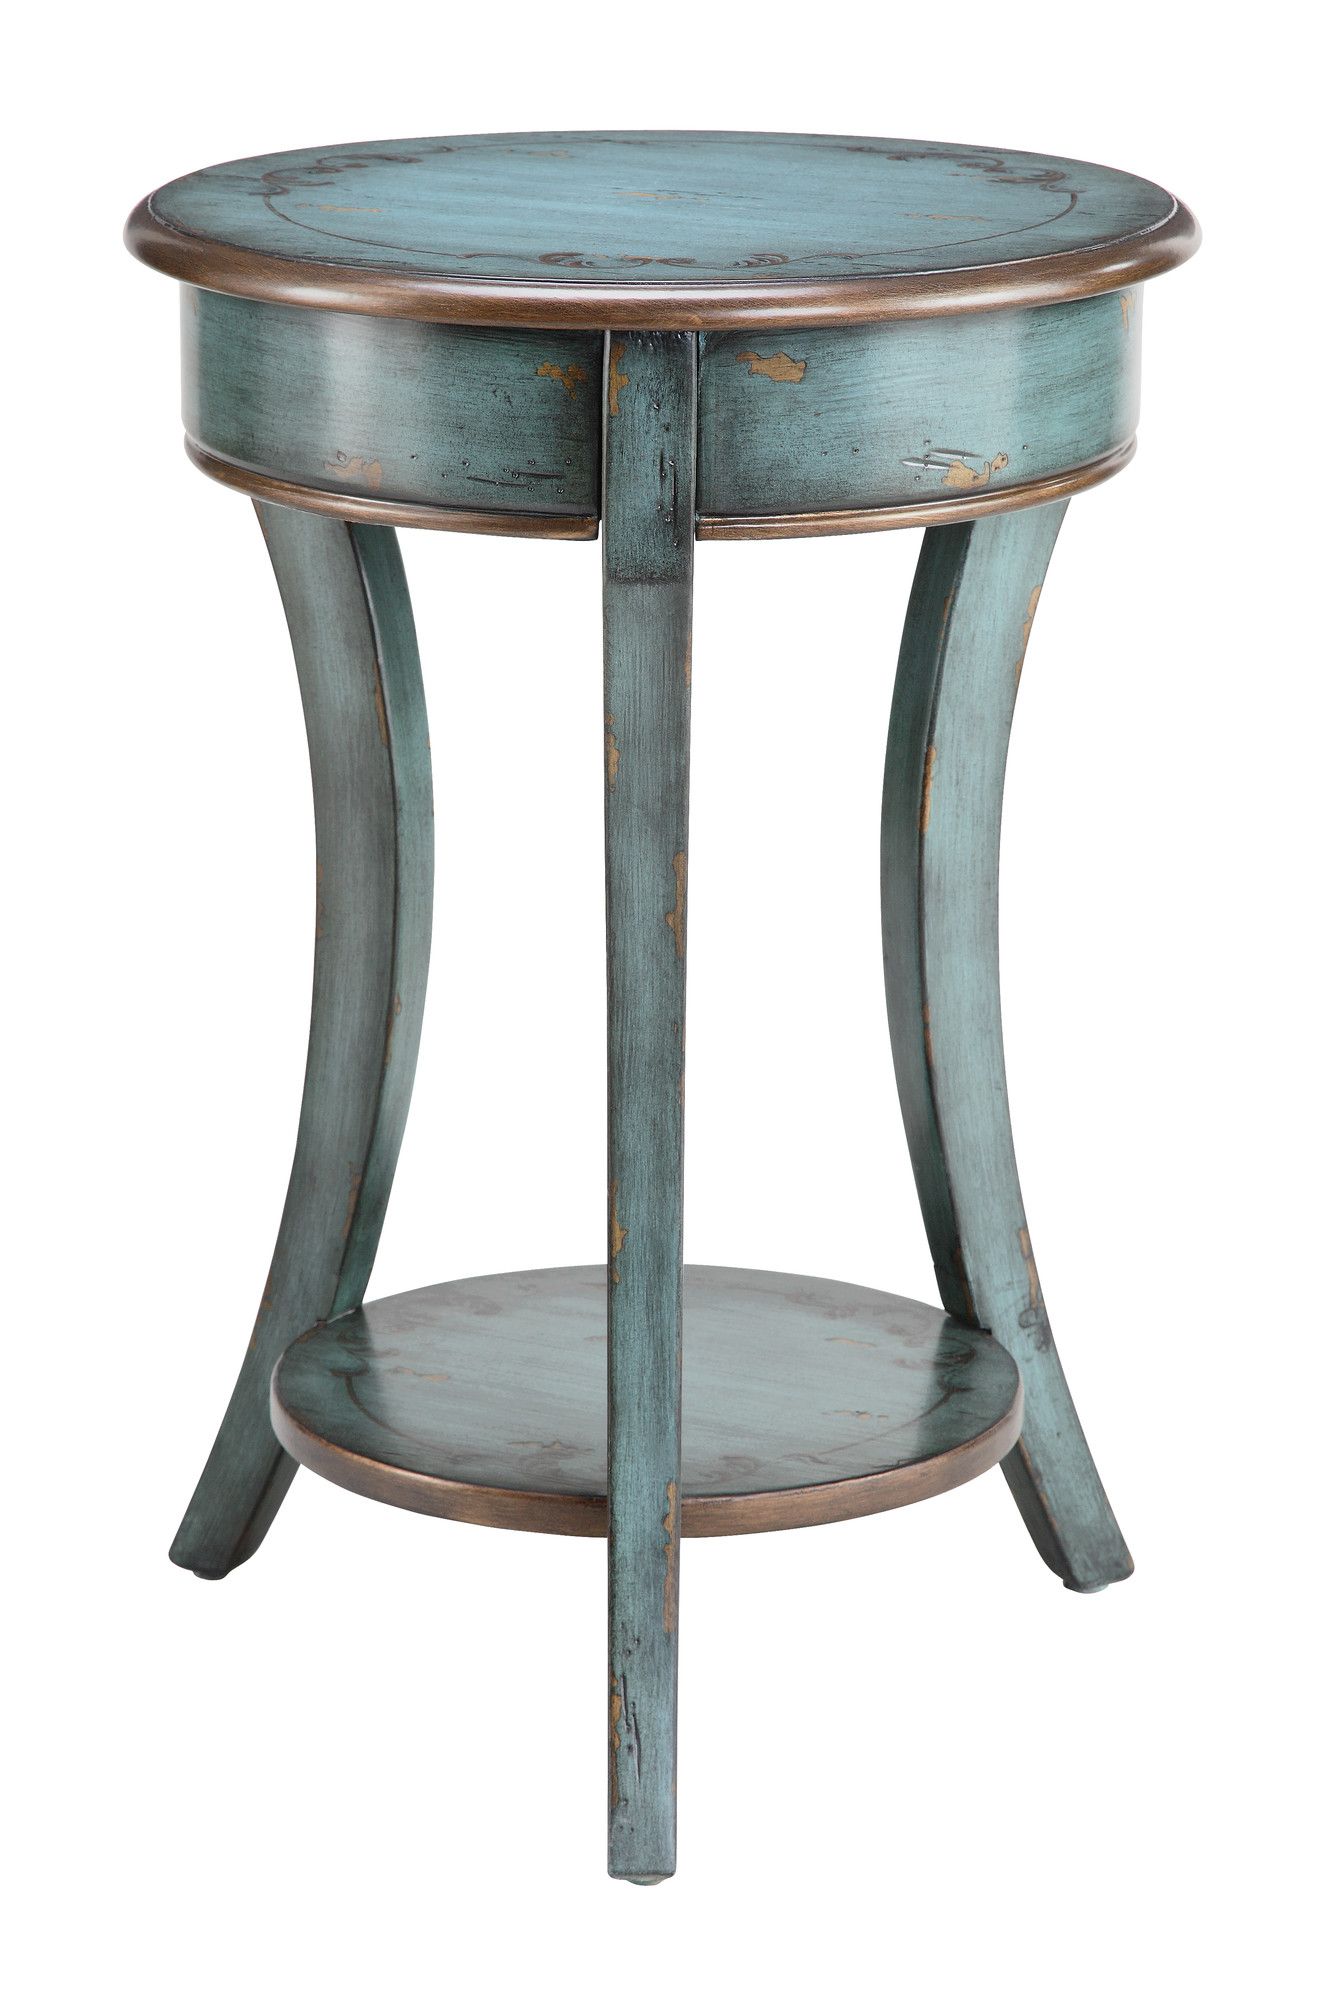 stein world painted treasures end table bronzed and distressed paint antique round accent job wine cupboard target furniture coffee black bedroom chair hallway console small side